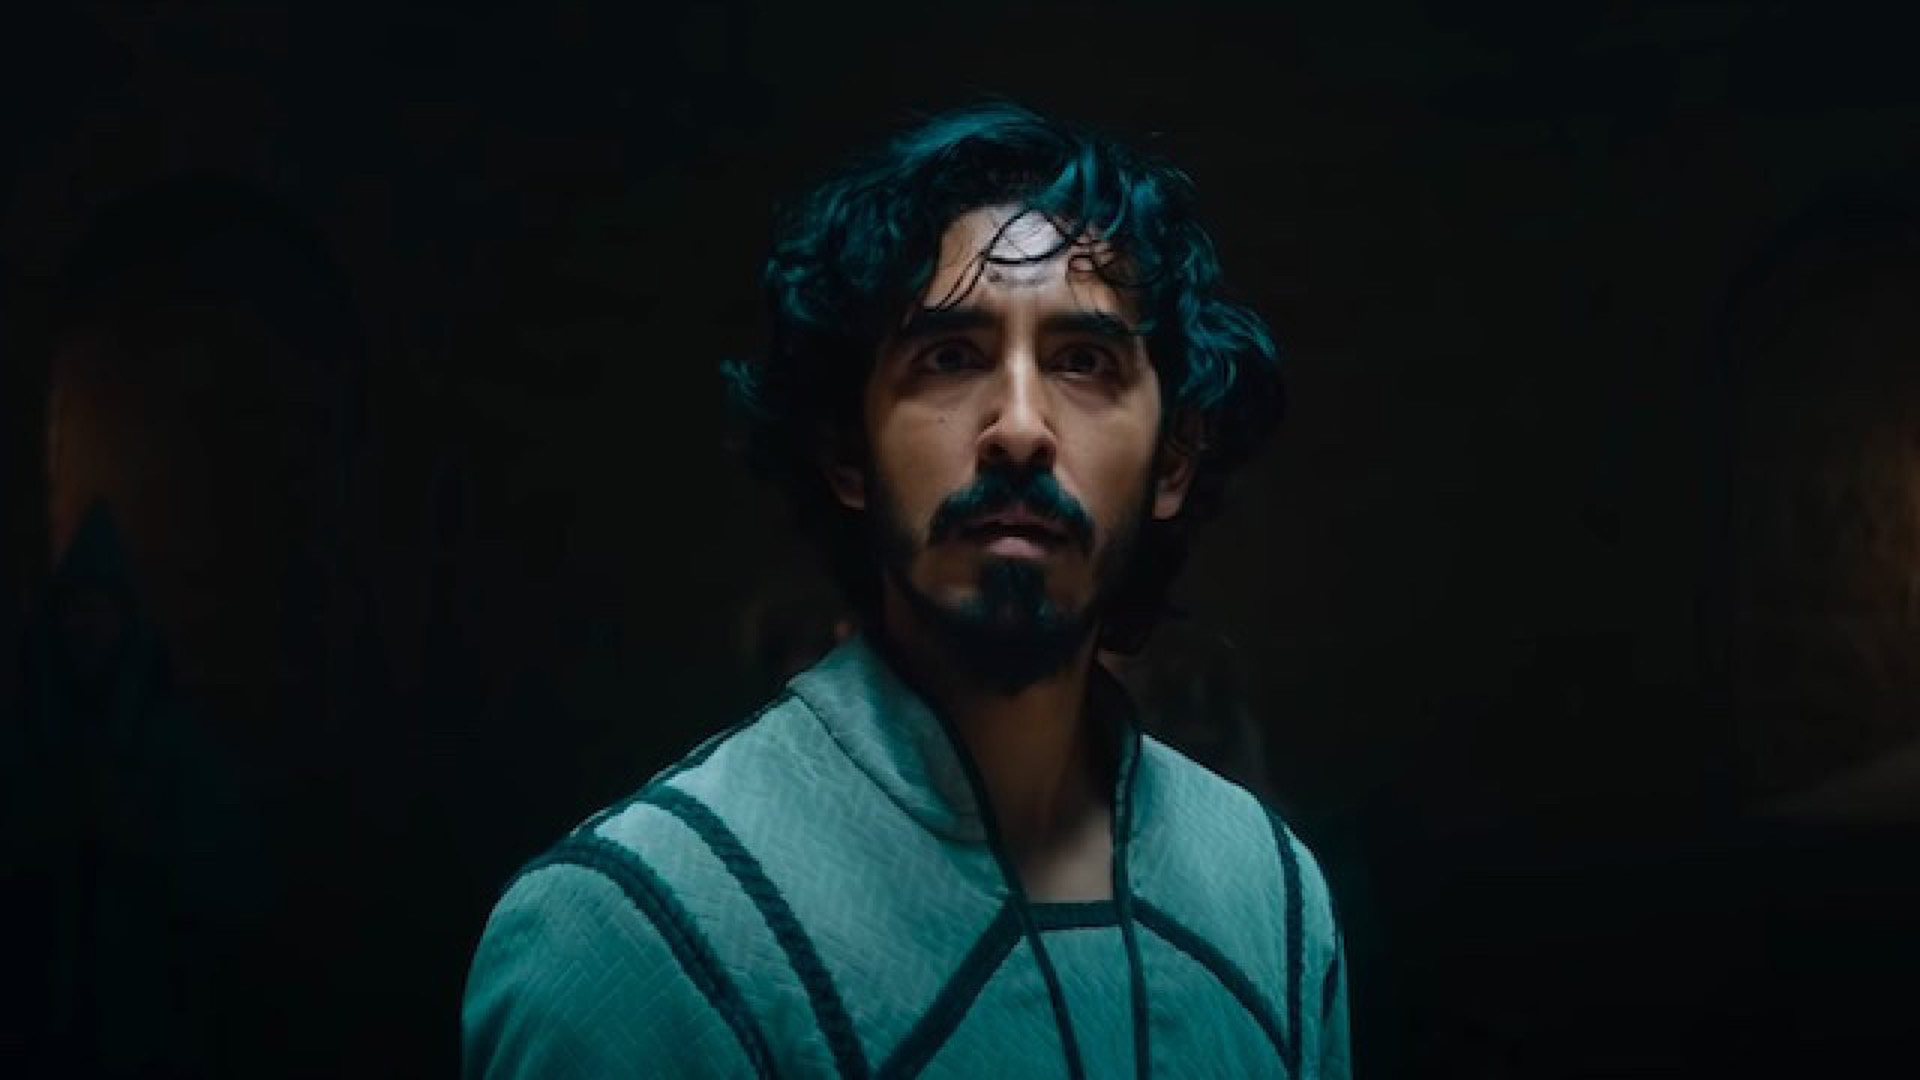 The Green Knight: Dev Patel plays a medieval hero on a mysterious quest. 1920x1080 Full HD Background.